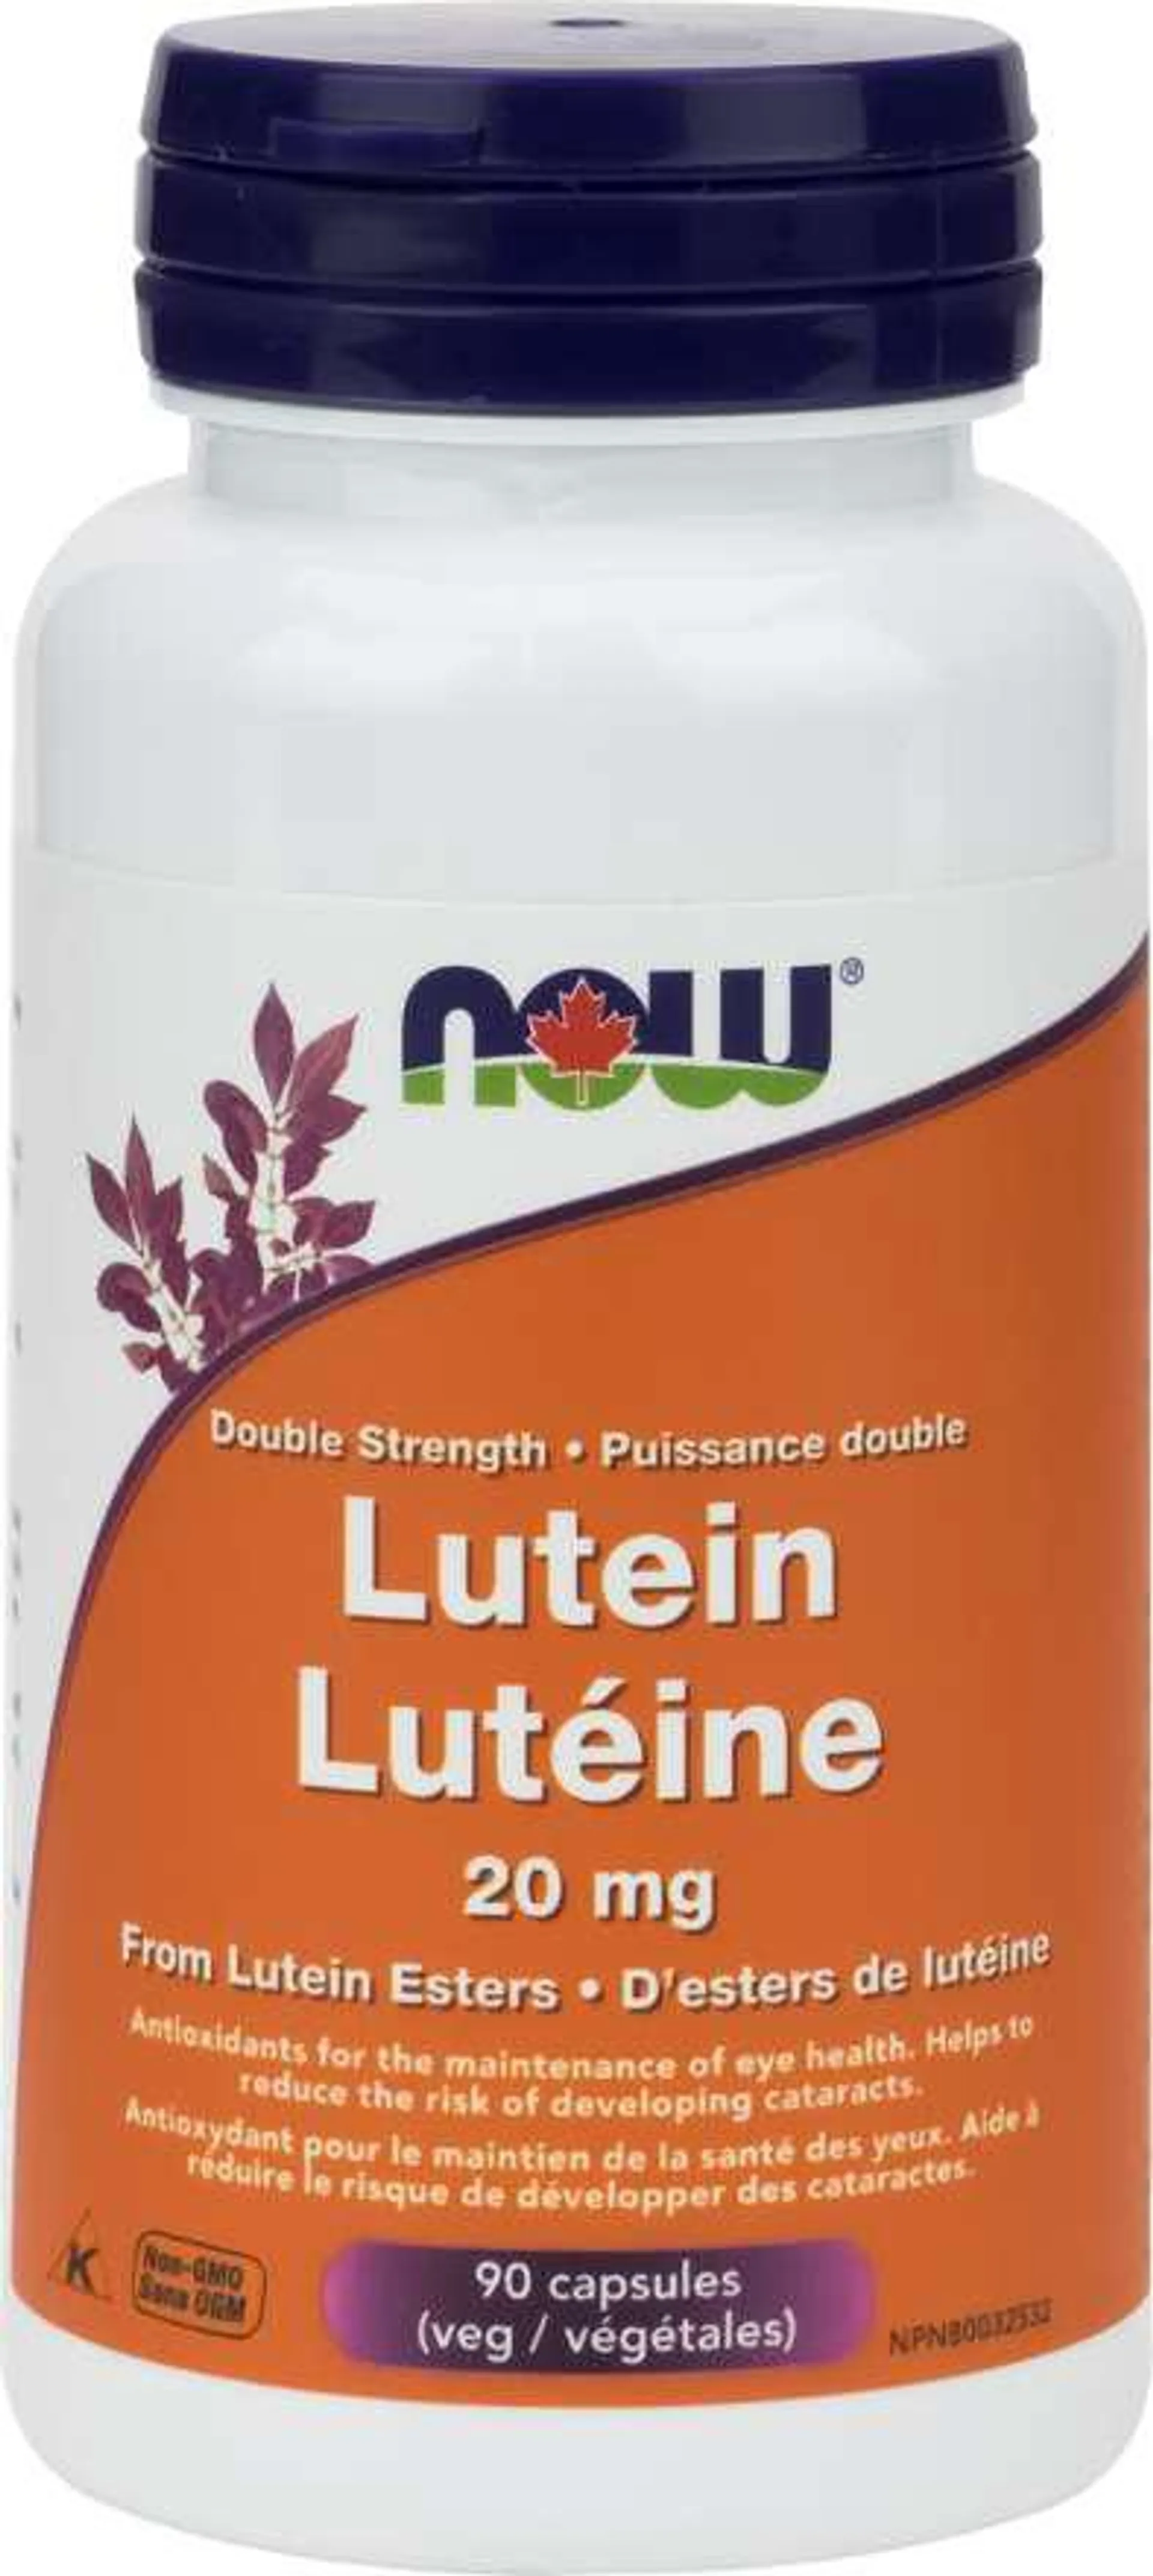 Lutein - 20mg Double Strength